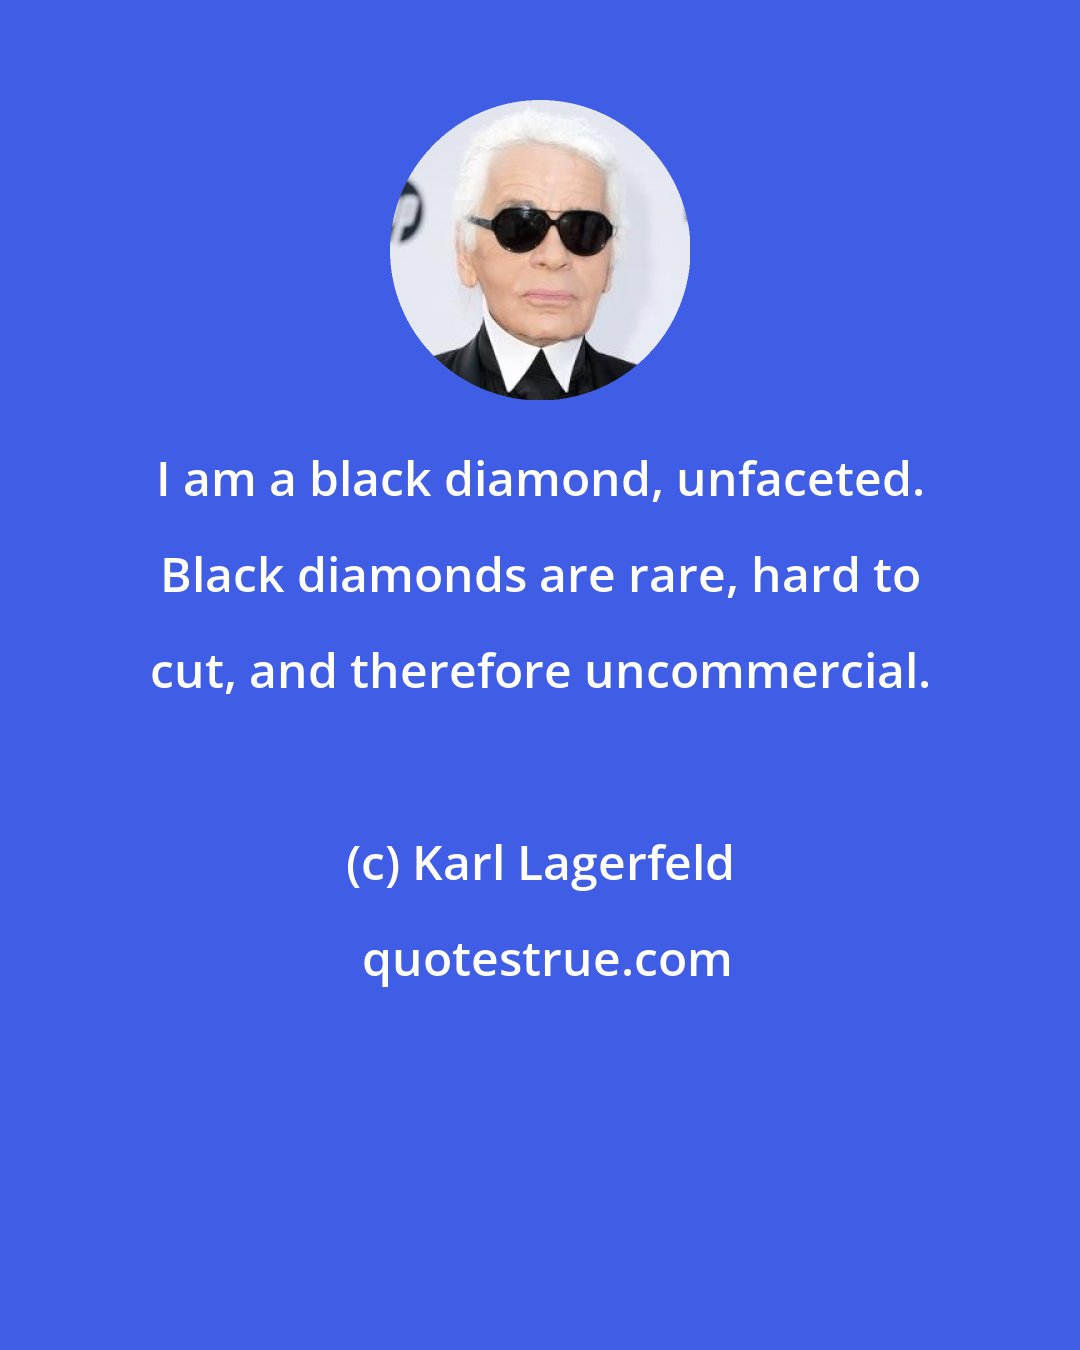 Karl Lagerfeld: I am a black diamond, unfaceted. Black diamonds are rare, hard to cut, and therefore uncommercial.